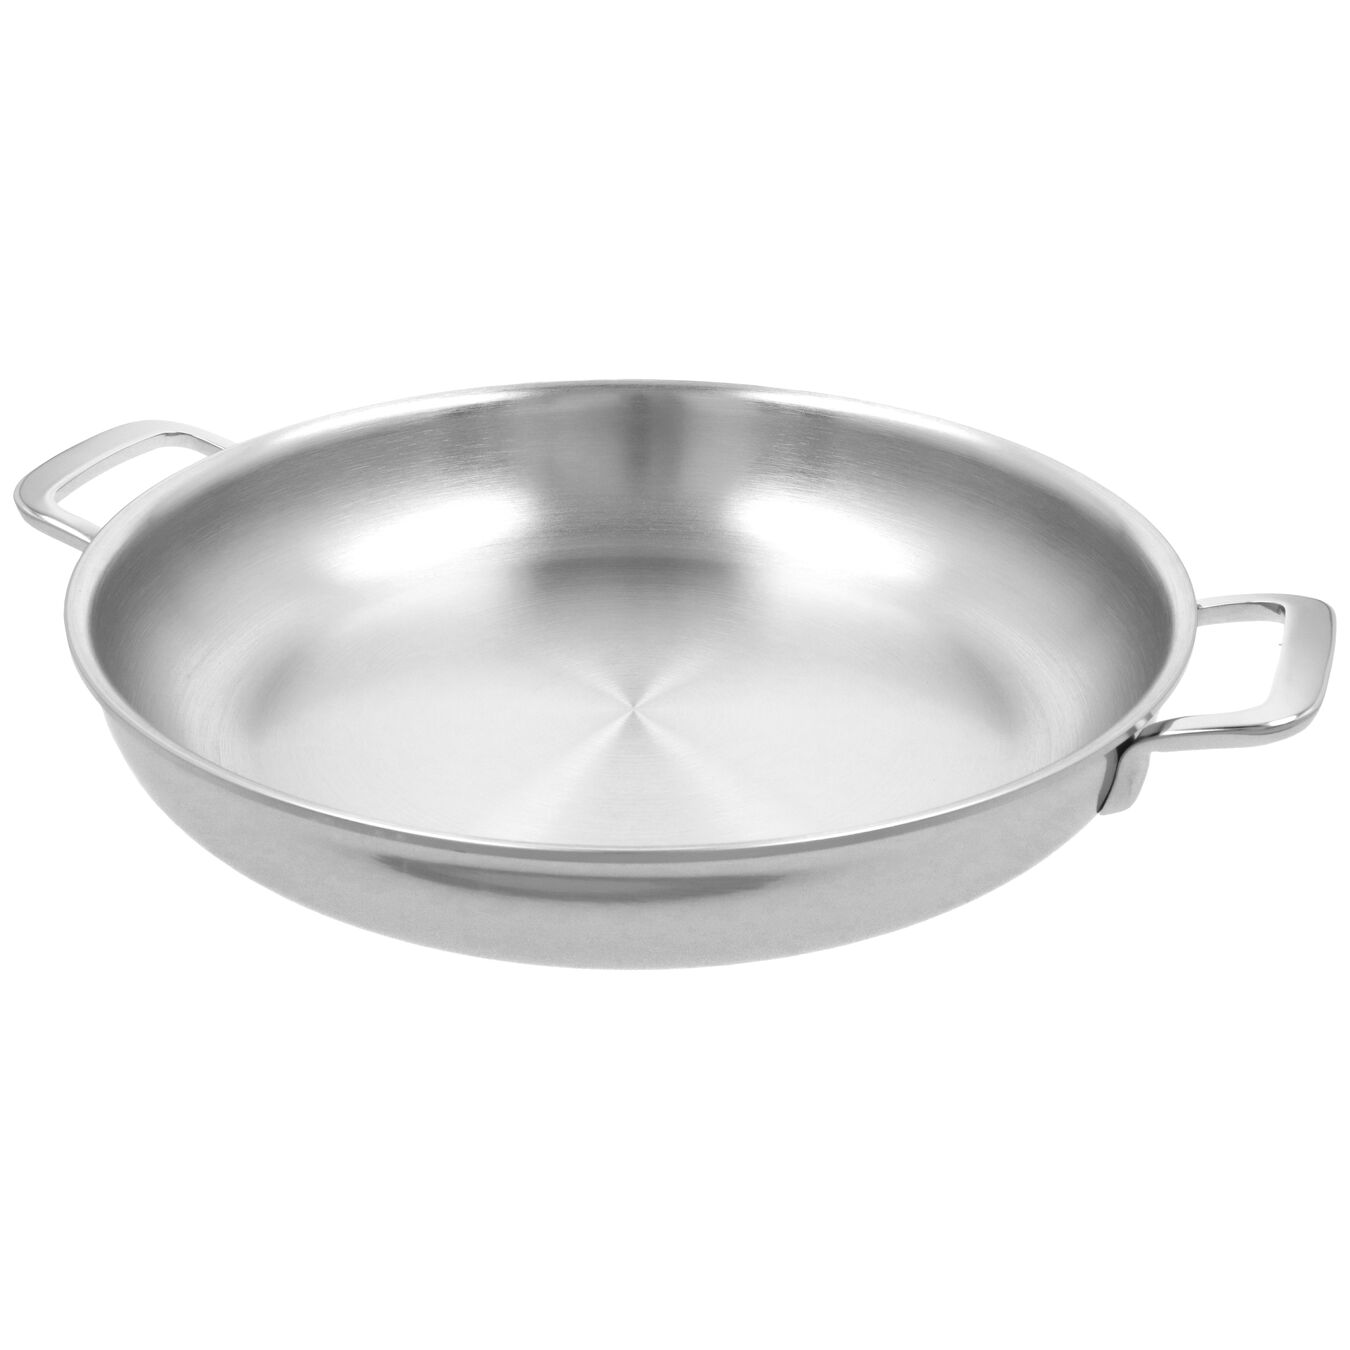 32 cm / 12.5 inch 18/10 Stainless Steel Frying pan with 2 handles,,large 3